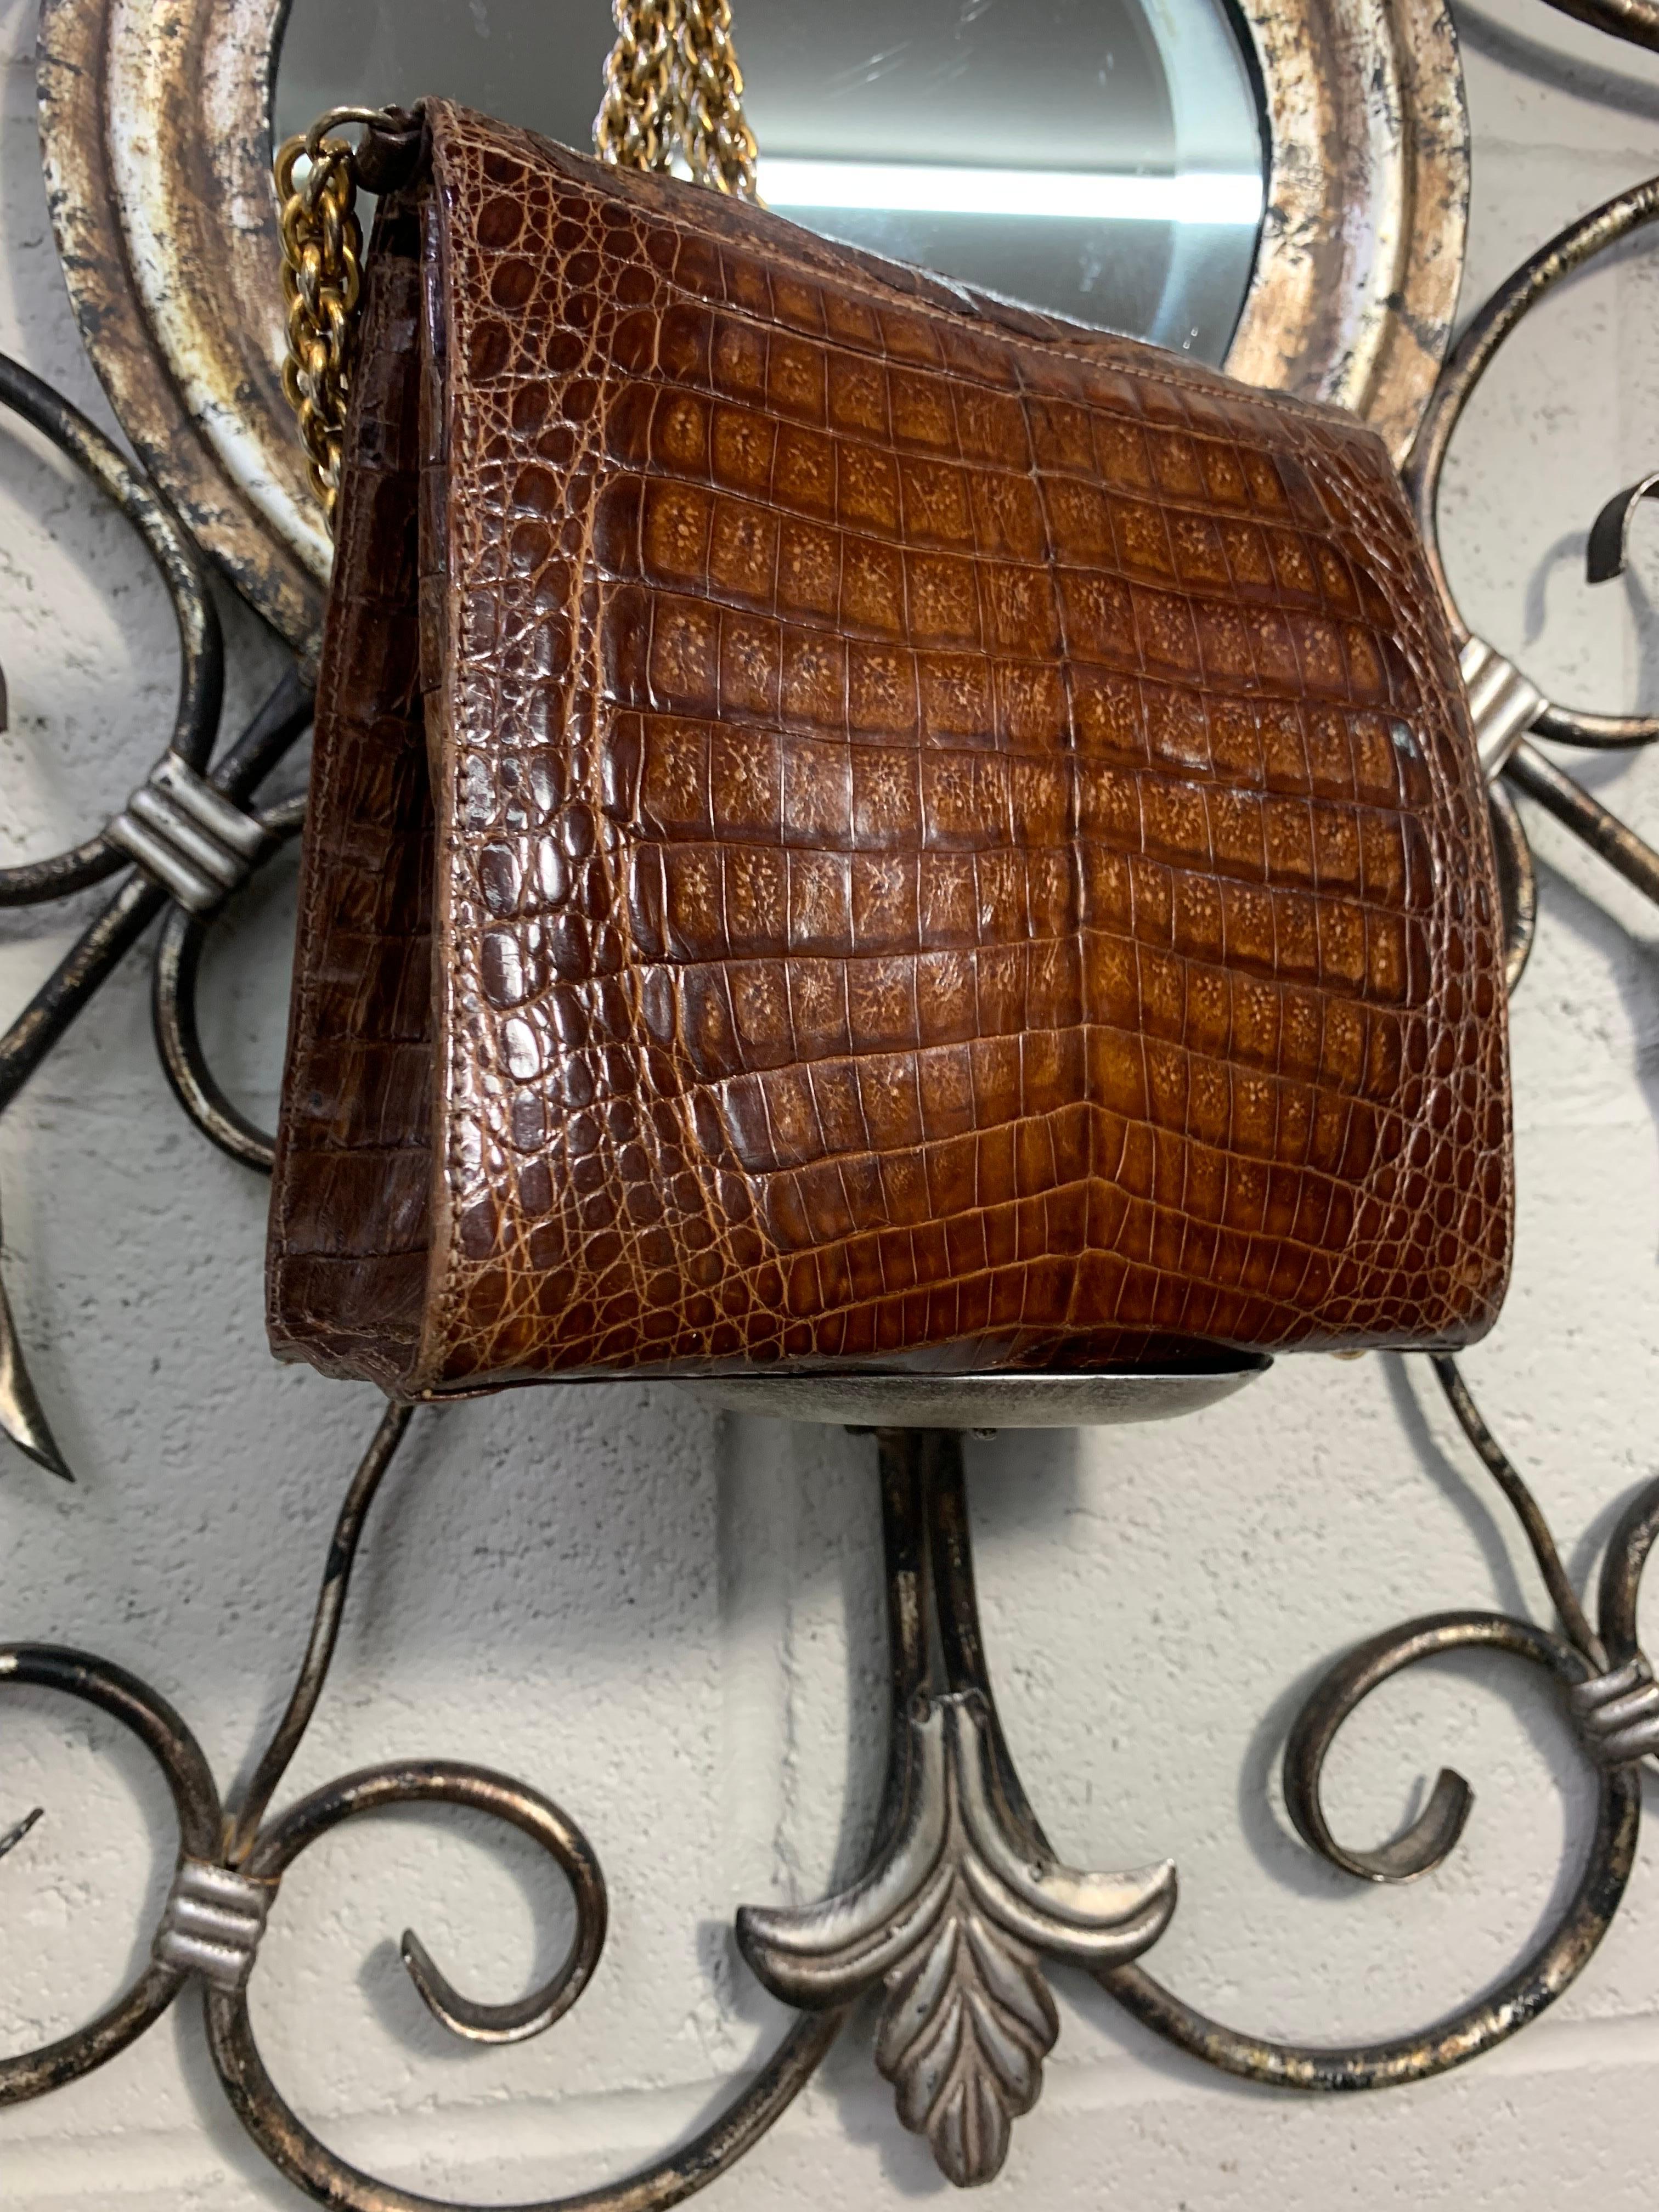 1990 Paloma Picasso Brown Alligator Shoulder Bag w Heavy Rope Chain Strap In Excellent Condition For Sale In Gresham, OR